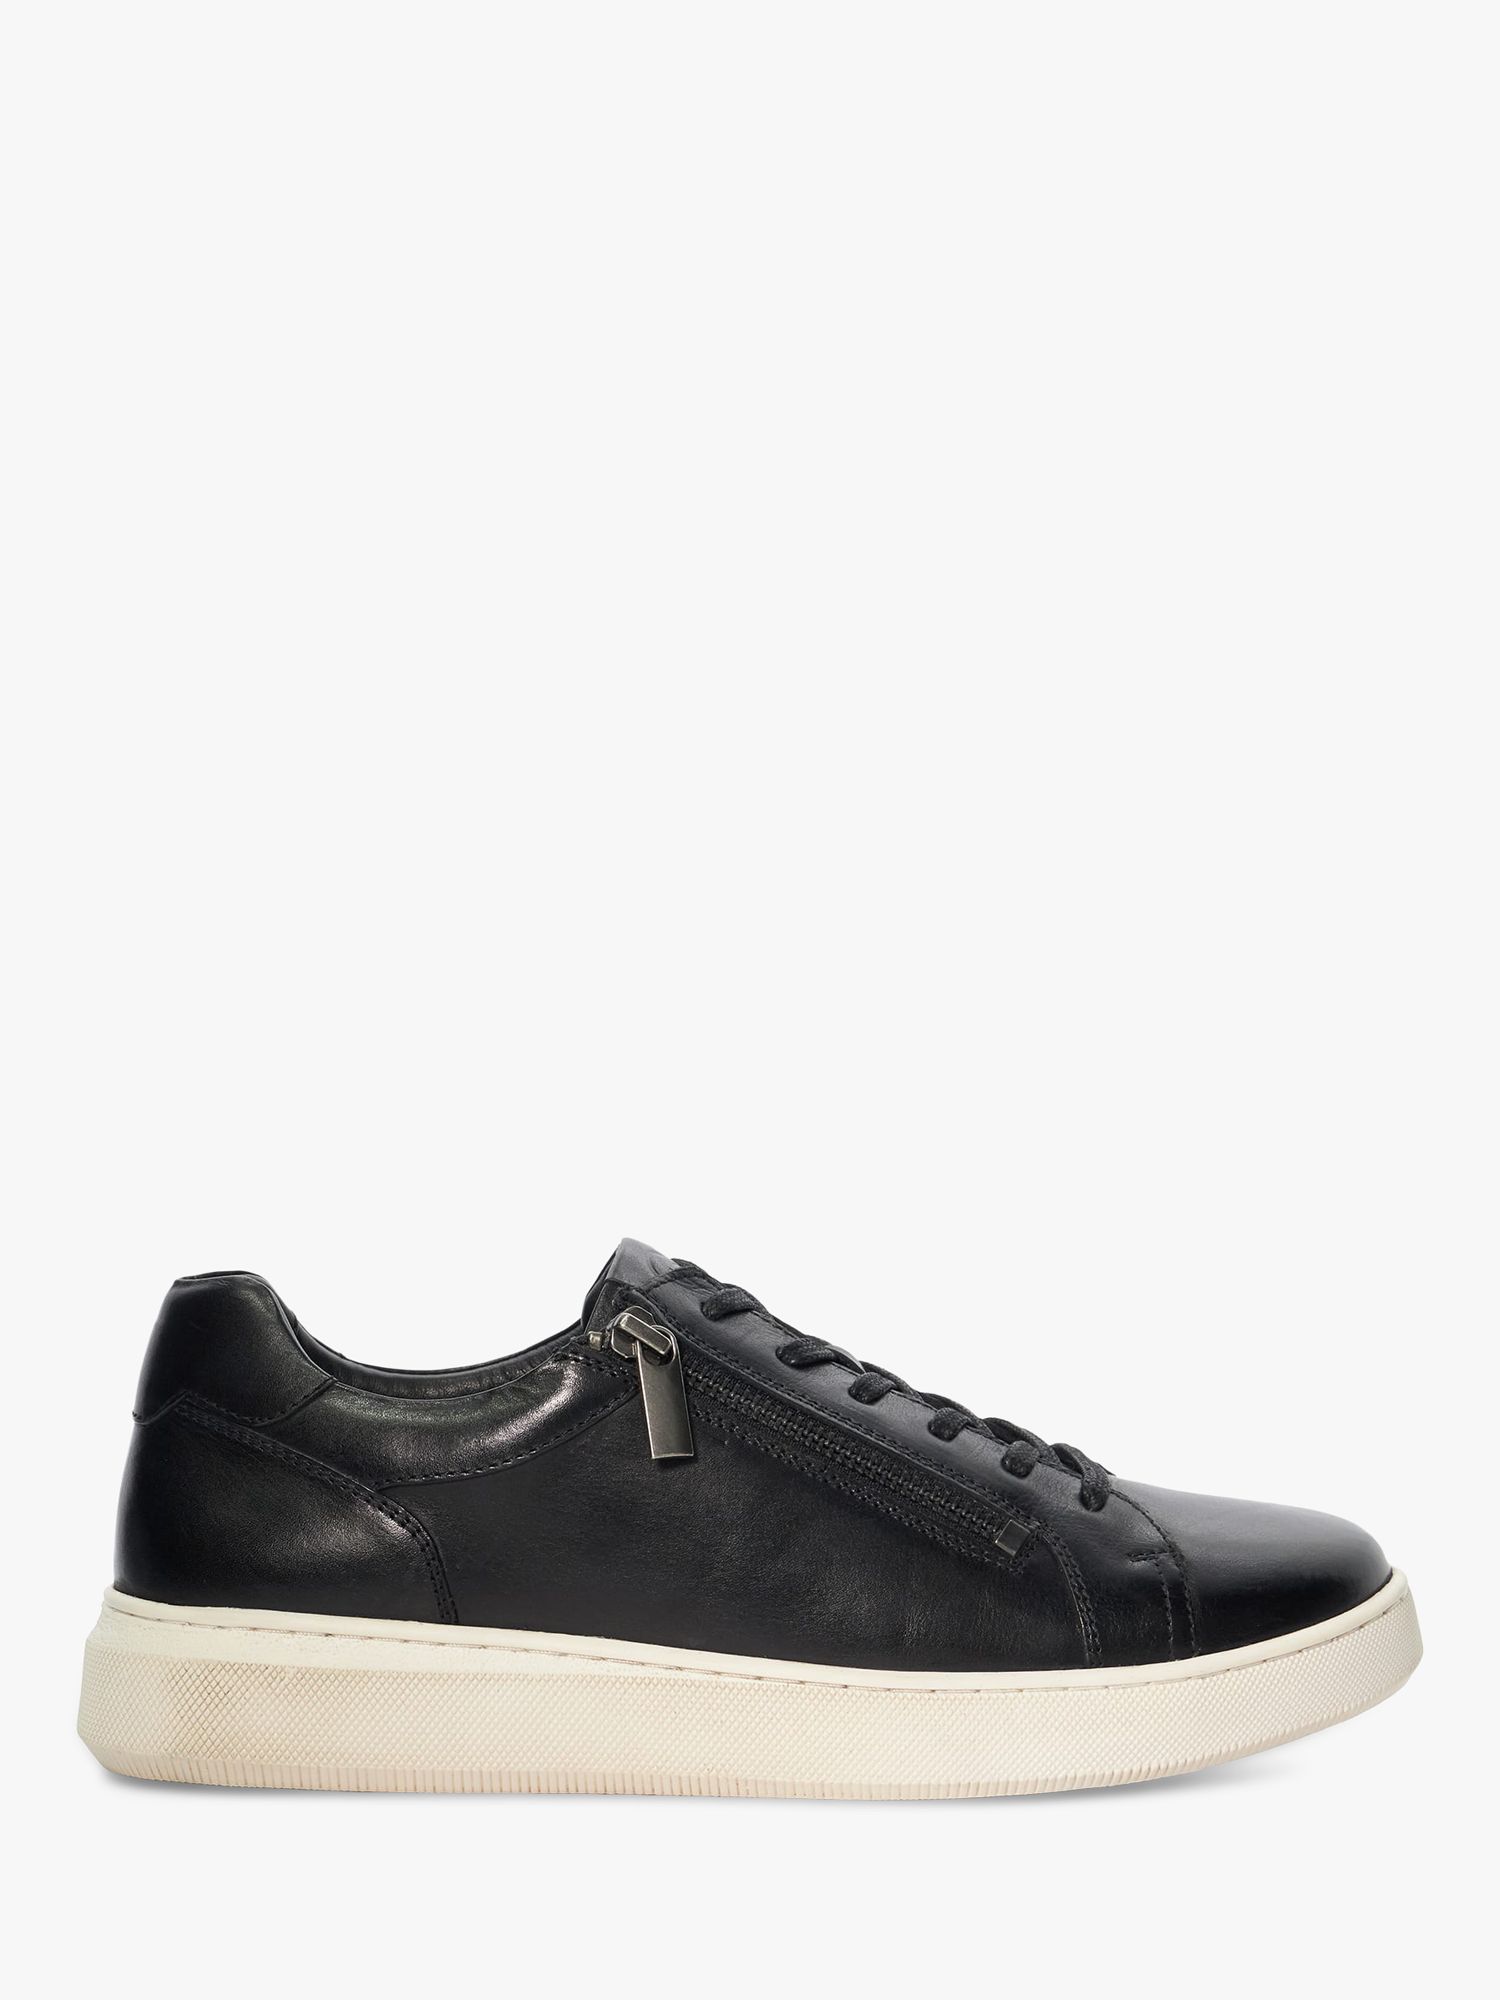 Dune Tribute Leather Zip Detail Trainers, Black at John Lewis & Partners